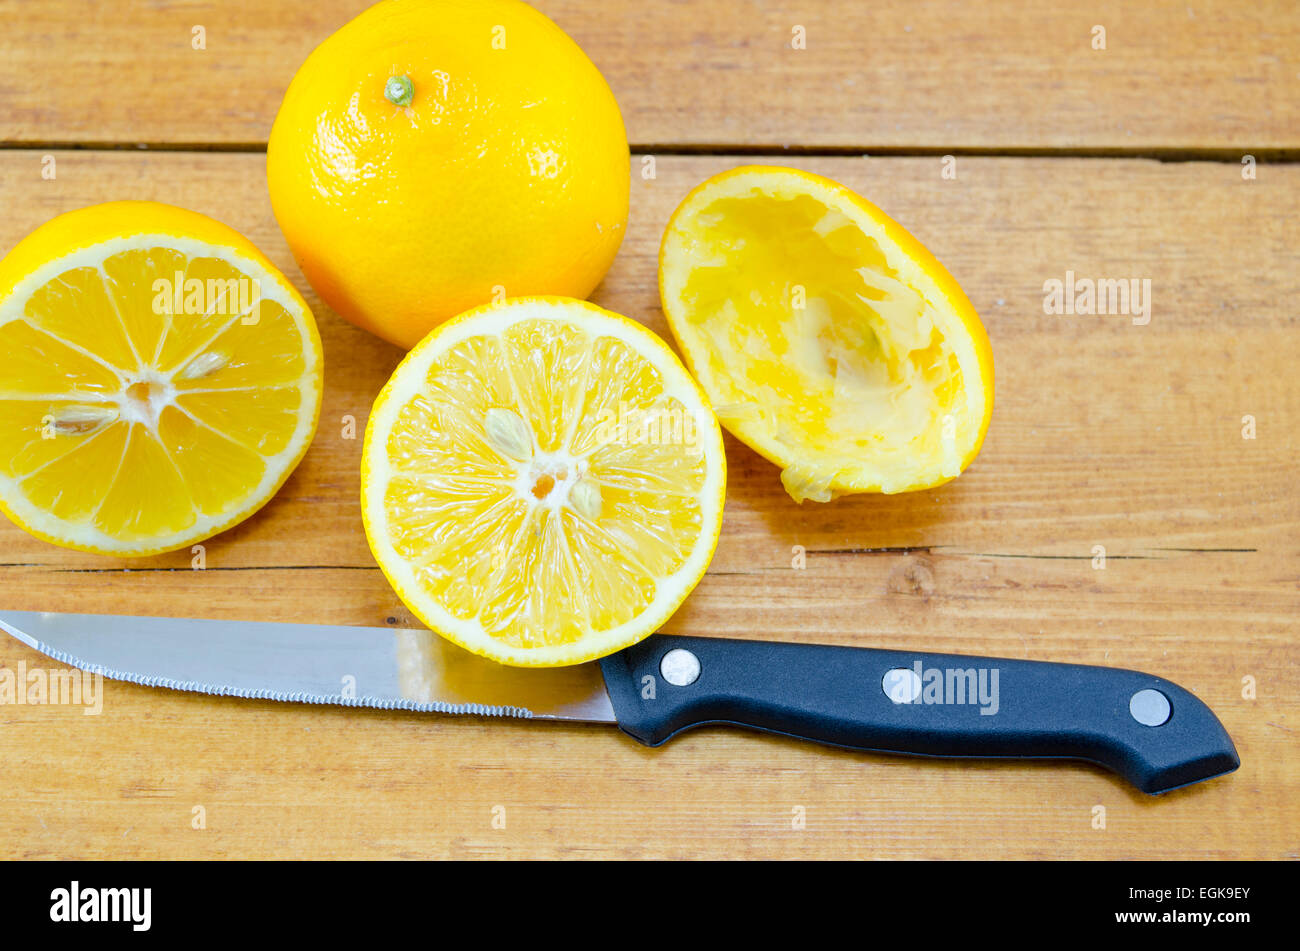 Halved lemon and a squeezed half together with a knife on a wooden table Stock Photo